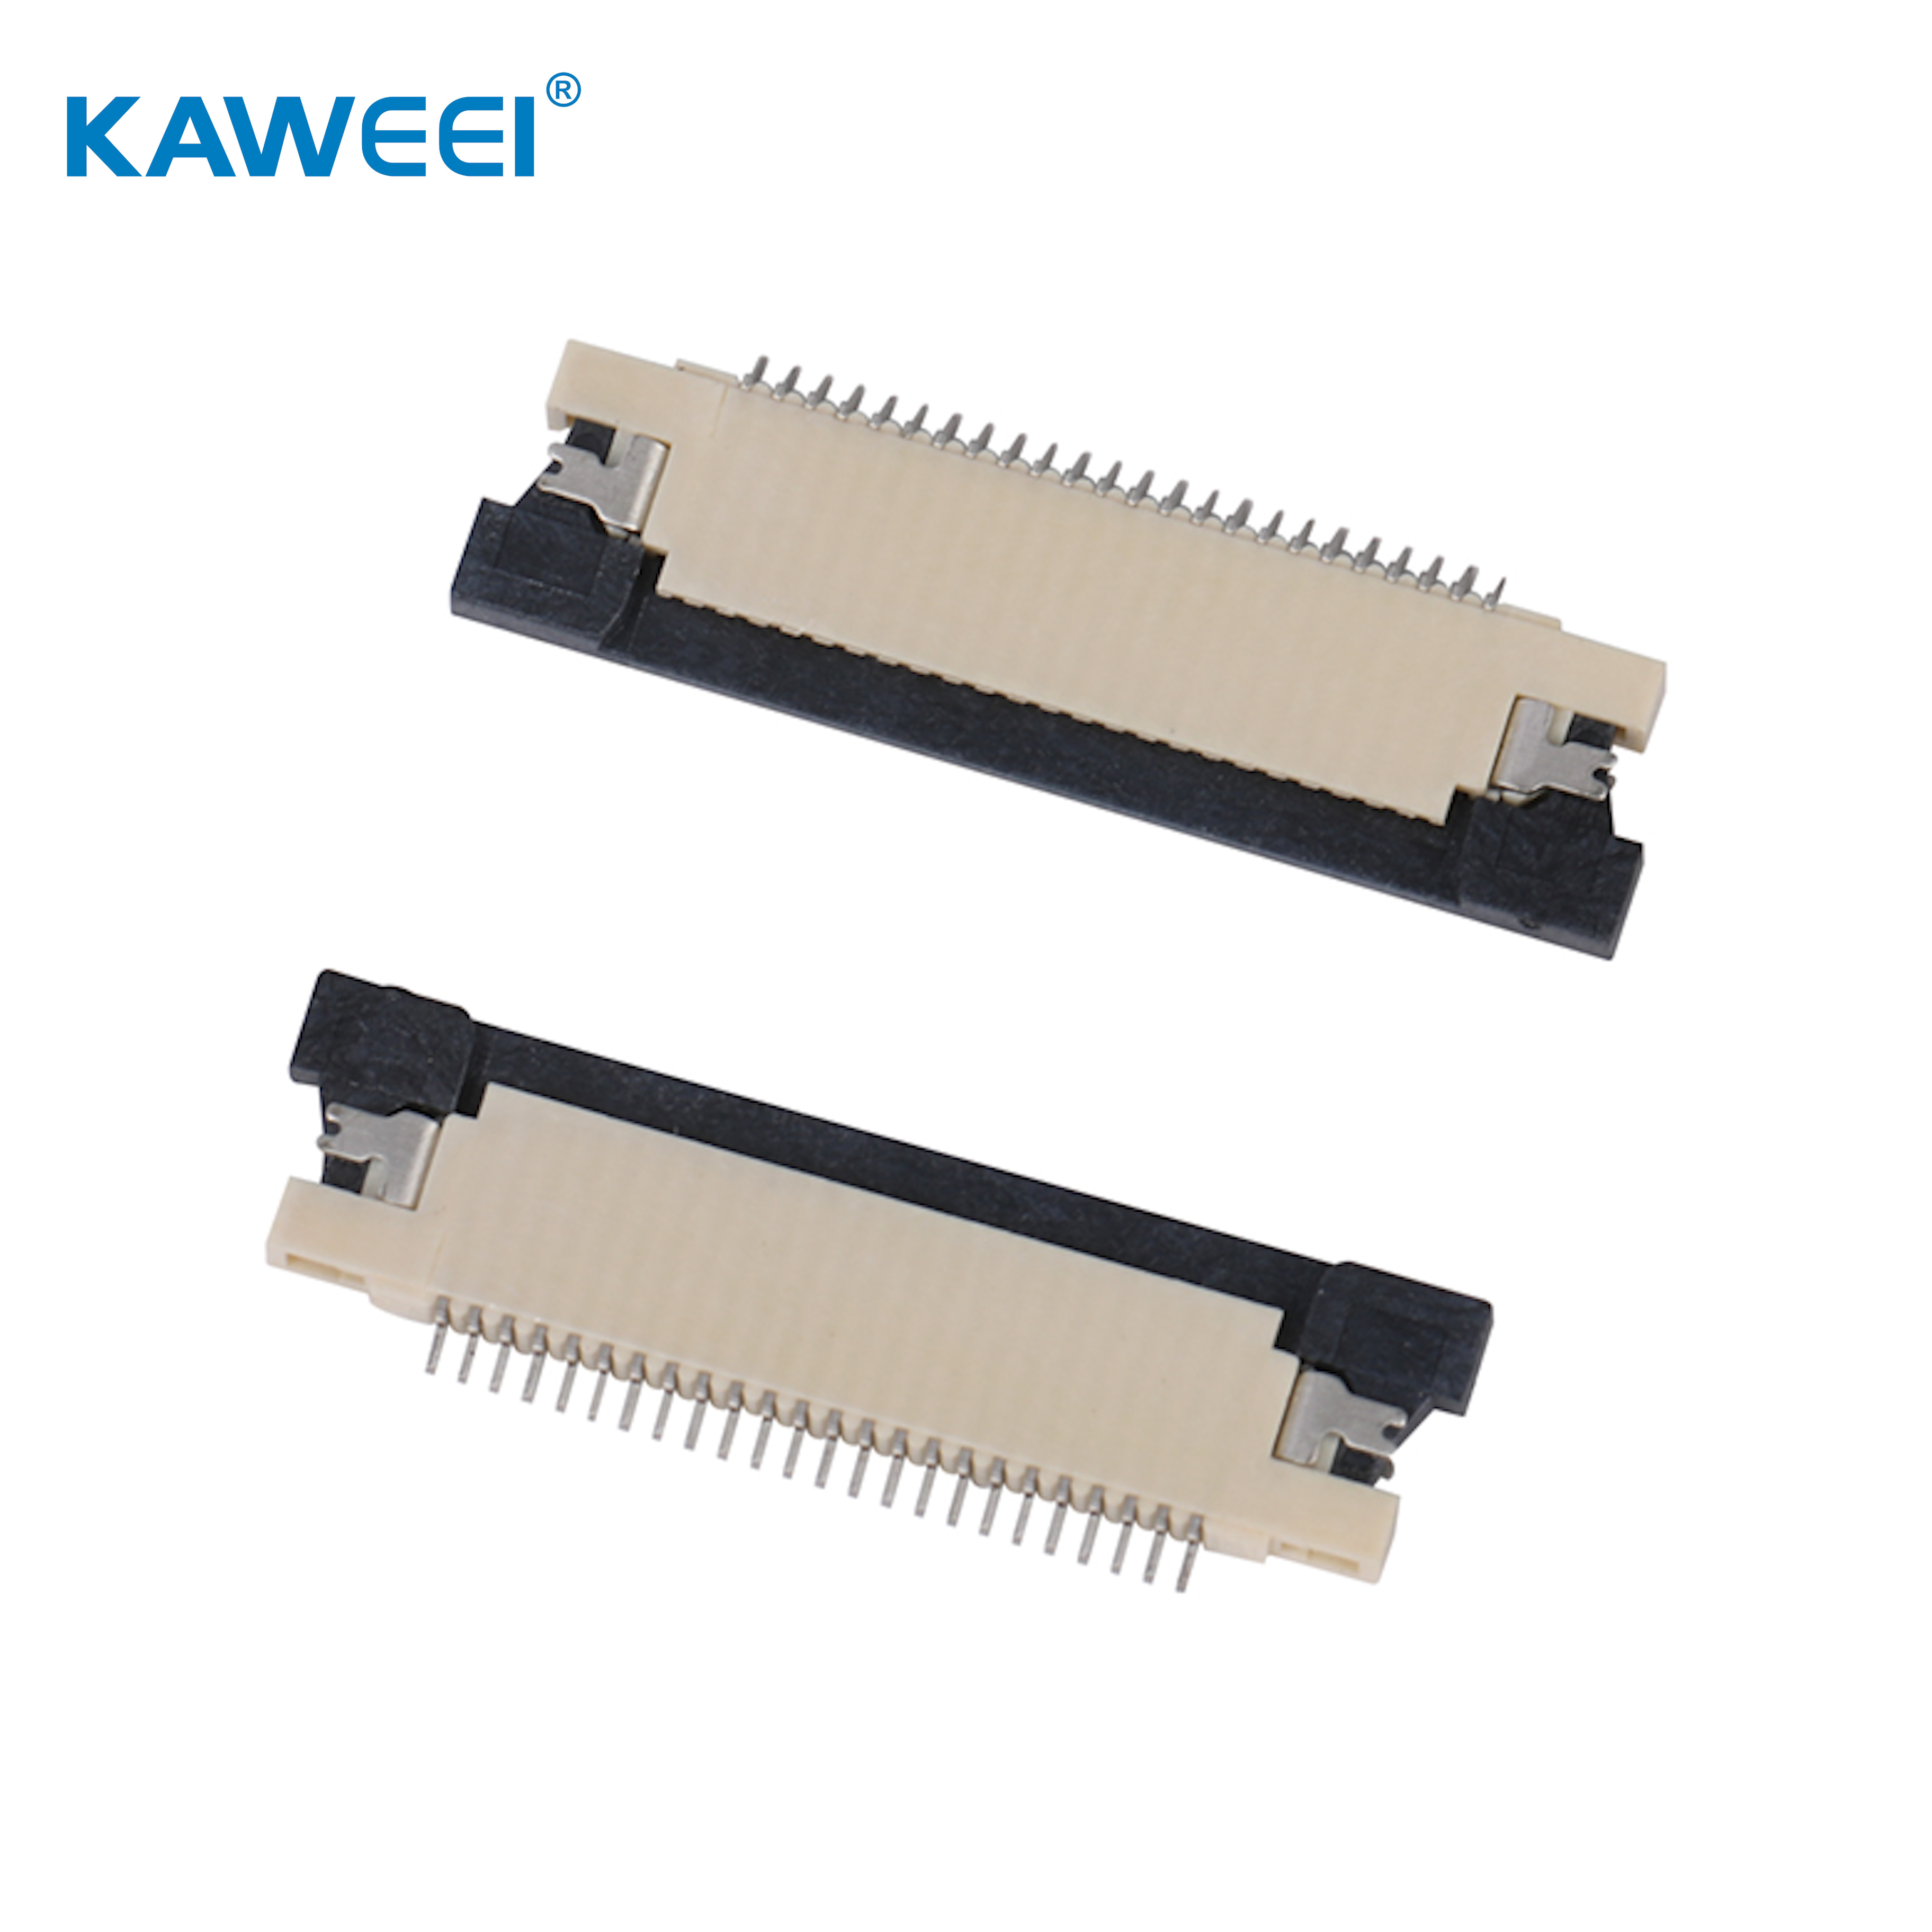 1.0mm Pitch FPC Top Upper contact right angle SMT Connector